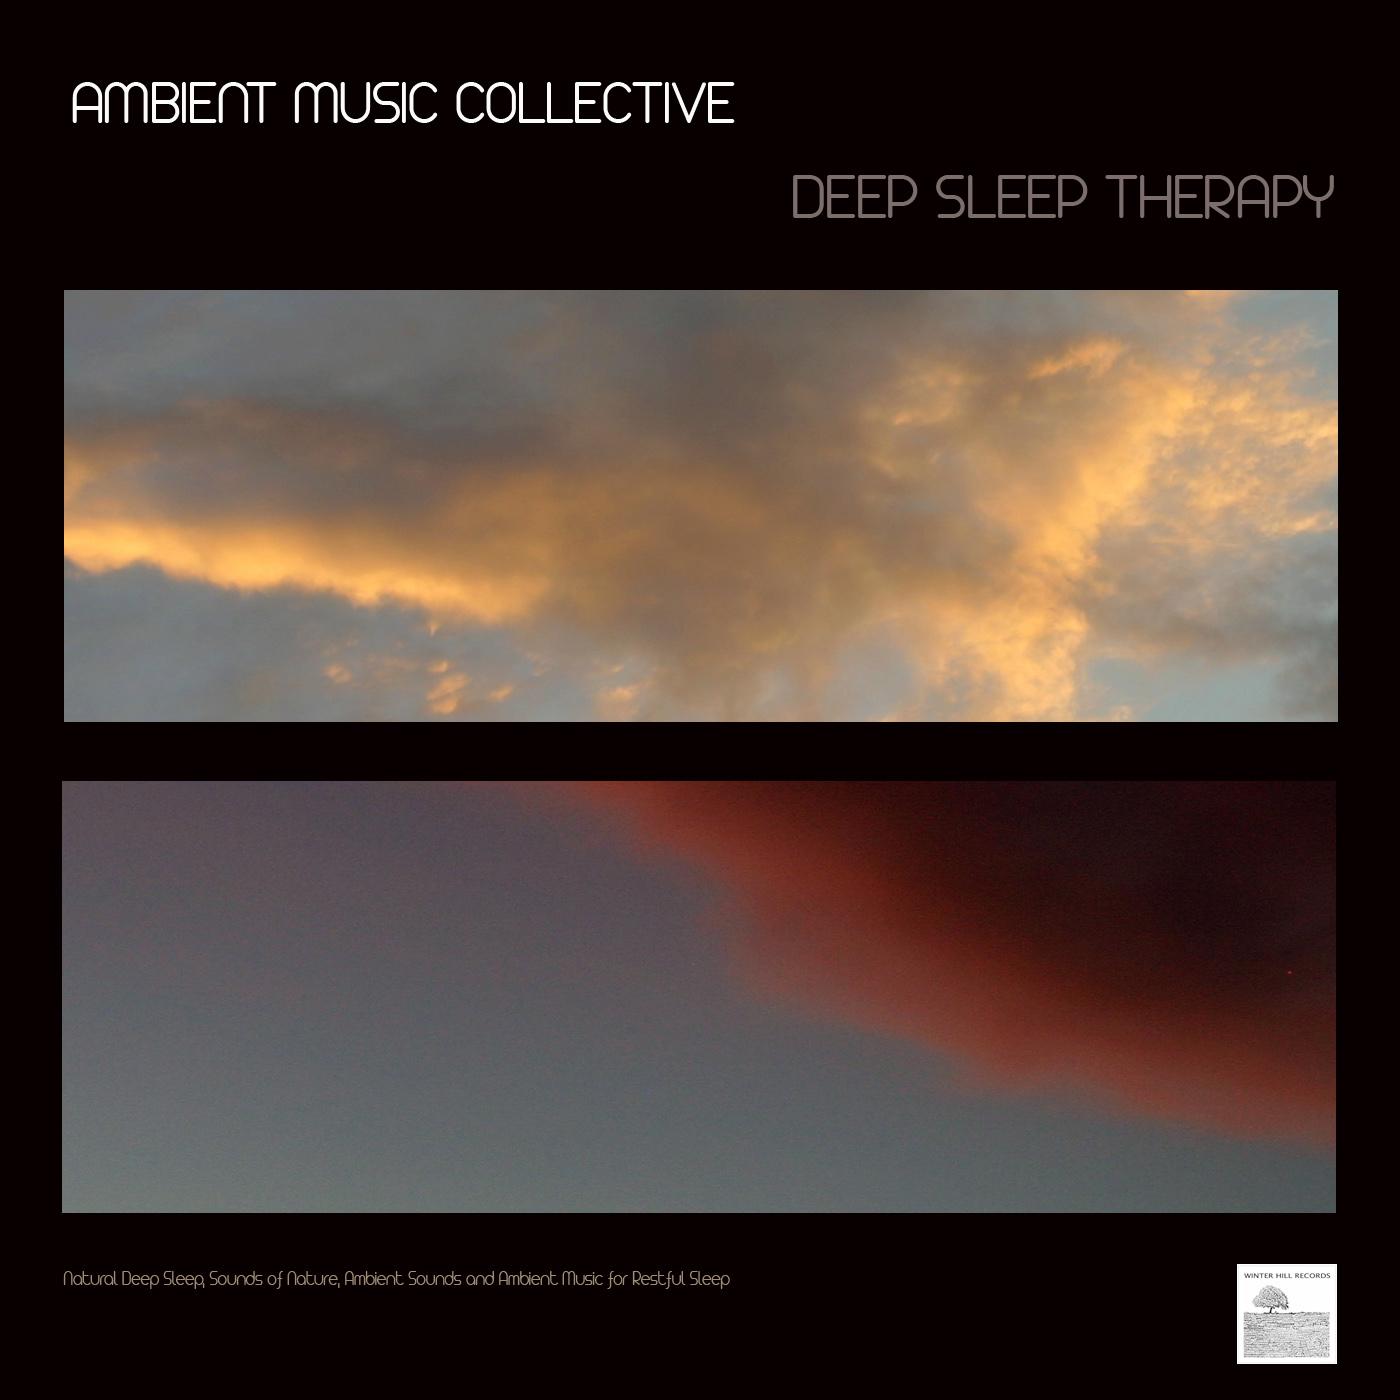 Deep Sleep Therapy - Natural Deep Sleep, Sounds of Nature, Ambient Sounds and Ambient Music for Restful Sleep. Ambient Music